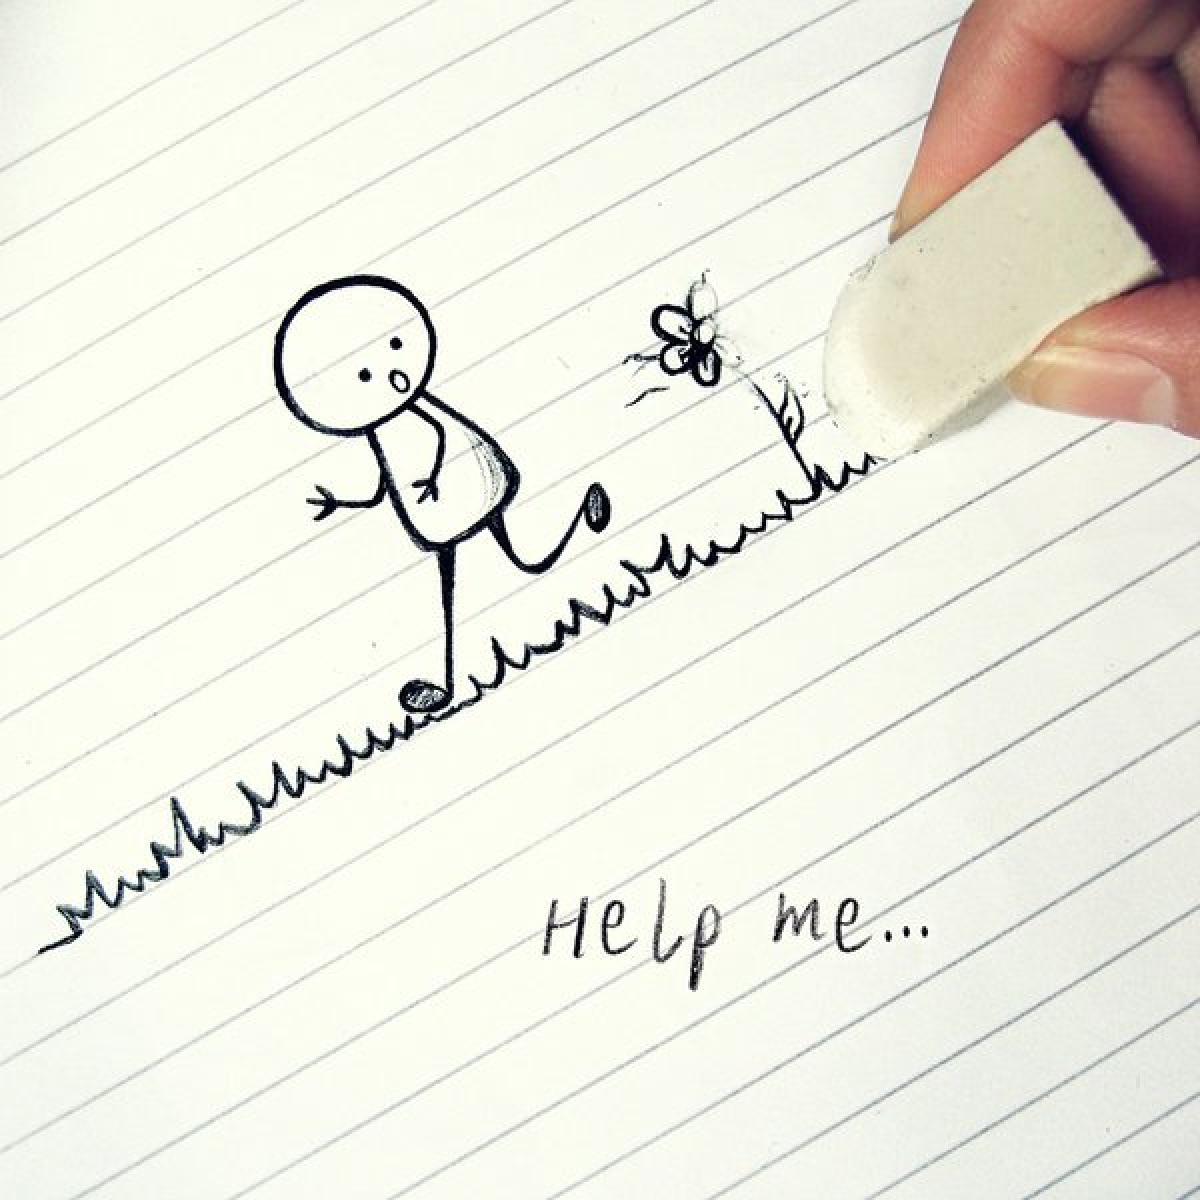 Pic®: "help me" by ~LimpidD